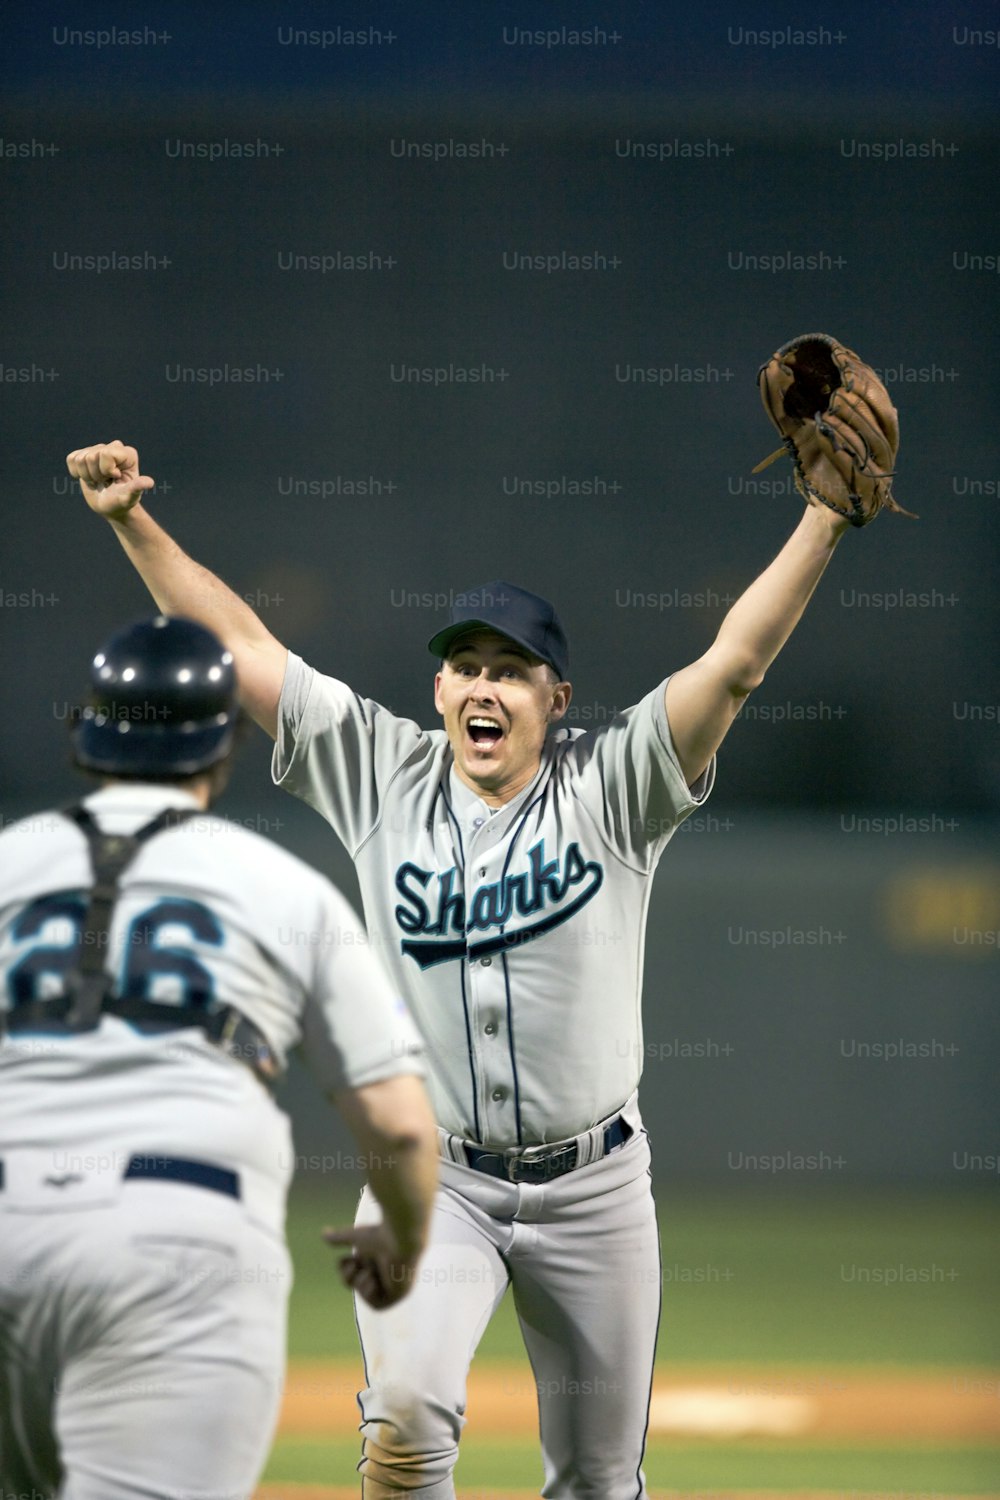 a baseball player holding a glove up in the air